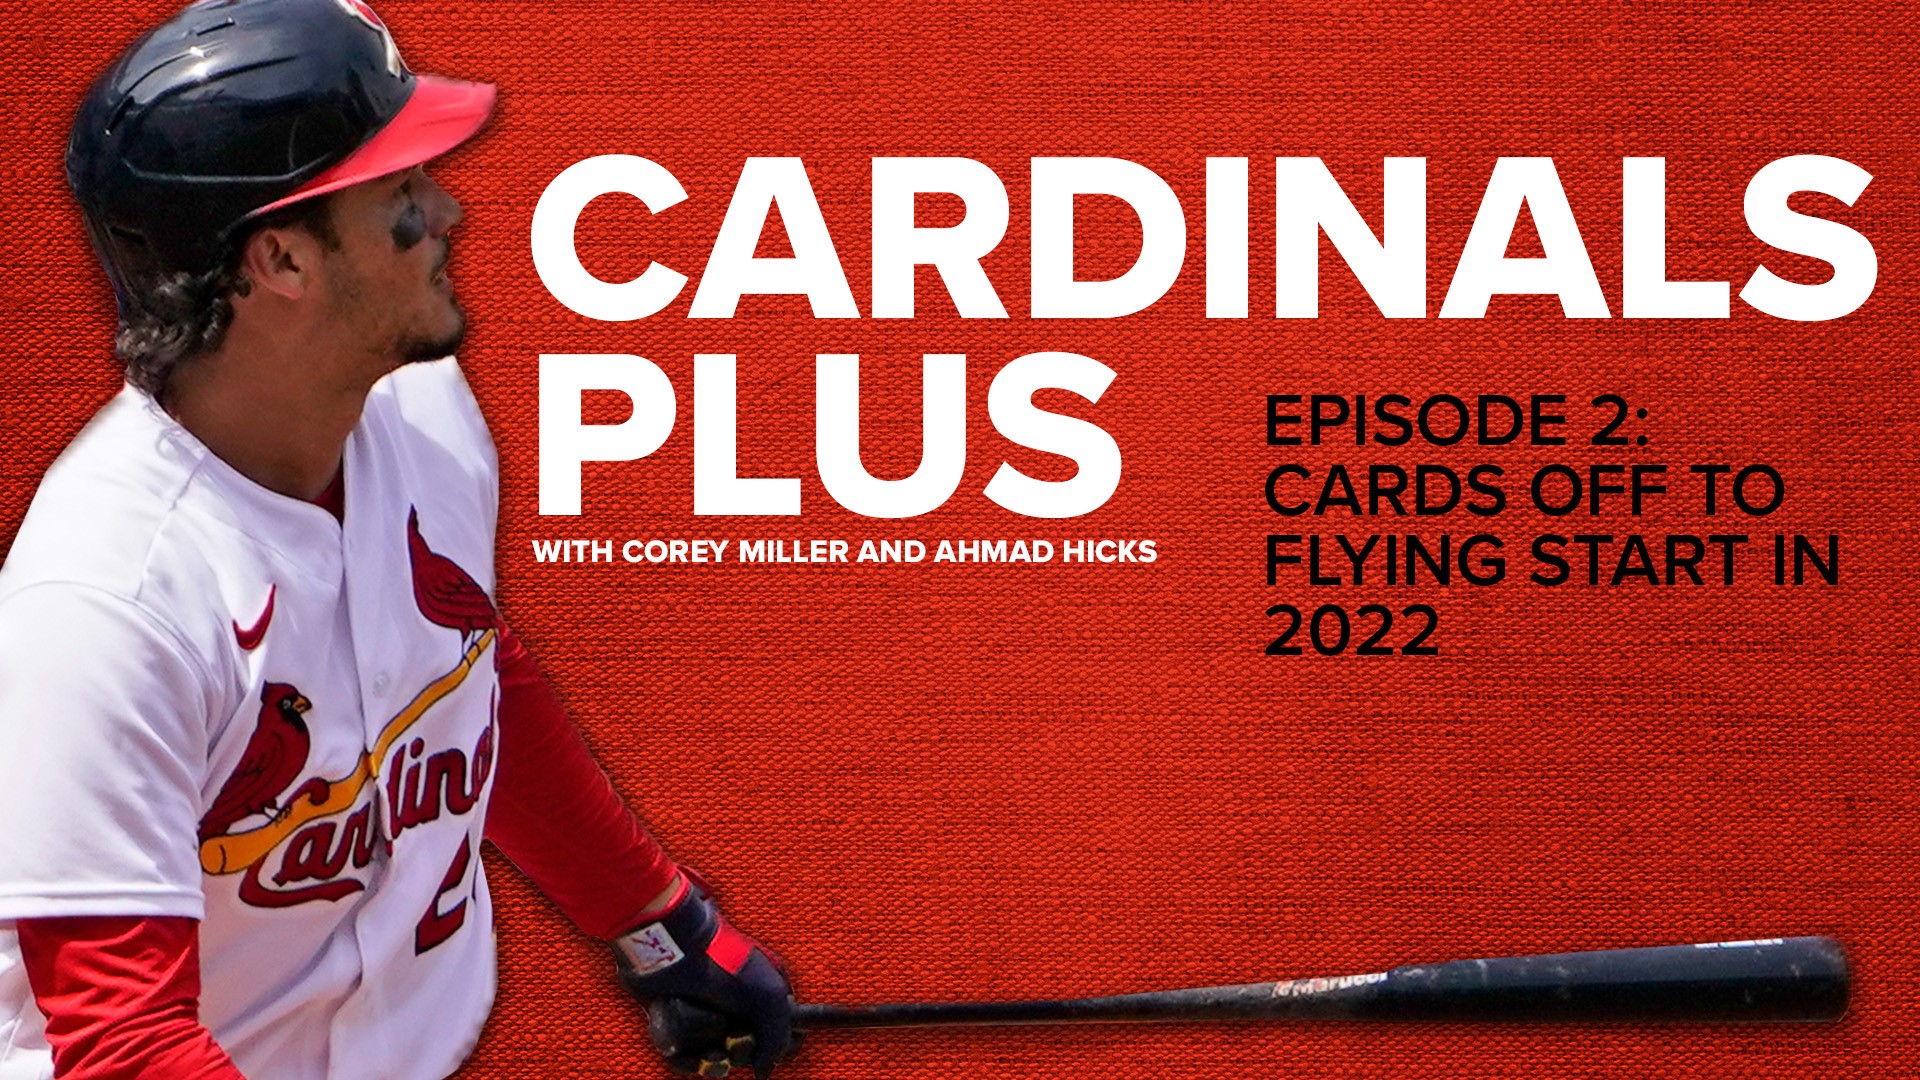 On this episode of Cardinals Plus, Corey Miller and Ahmad Hicks give their take on the first two weeks of the Cardinals' season, hitting all the major storylines.